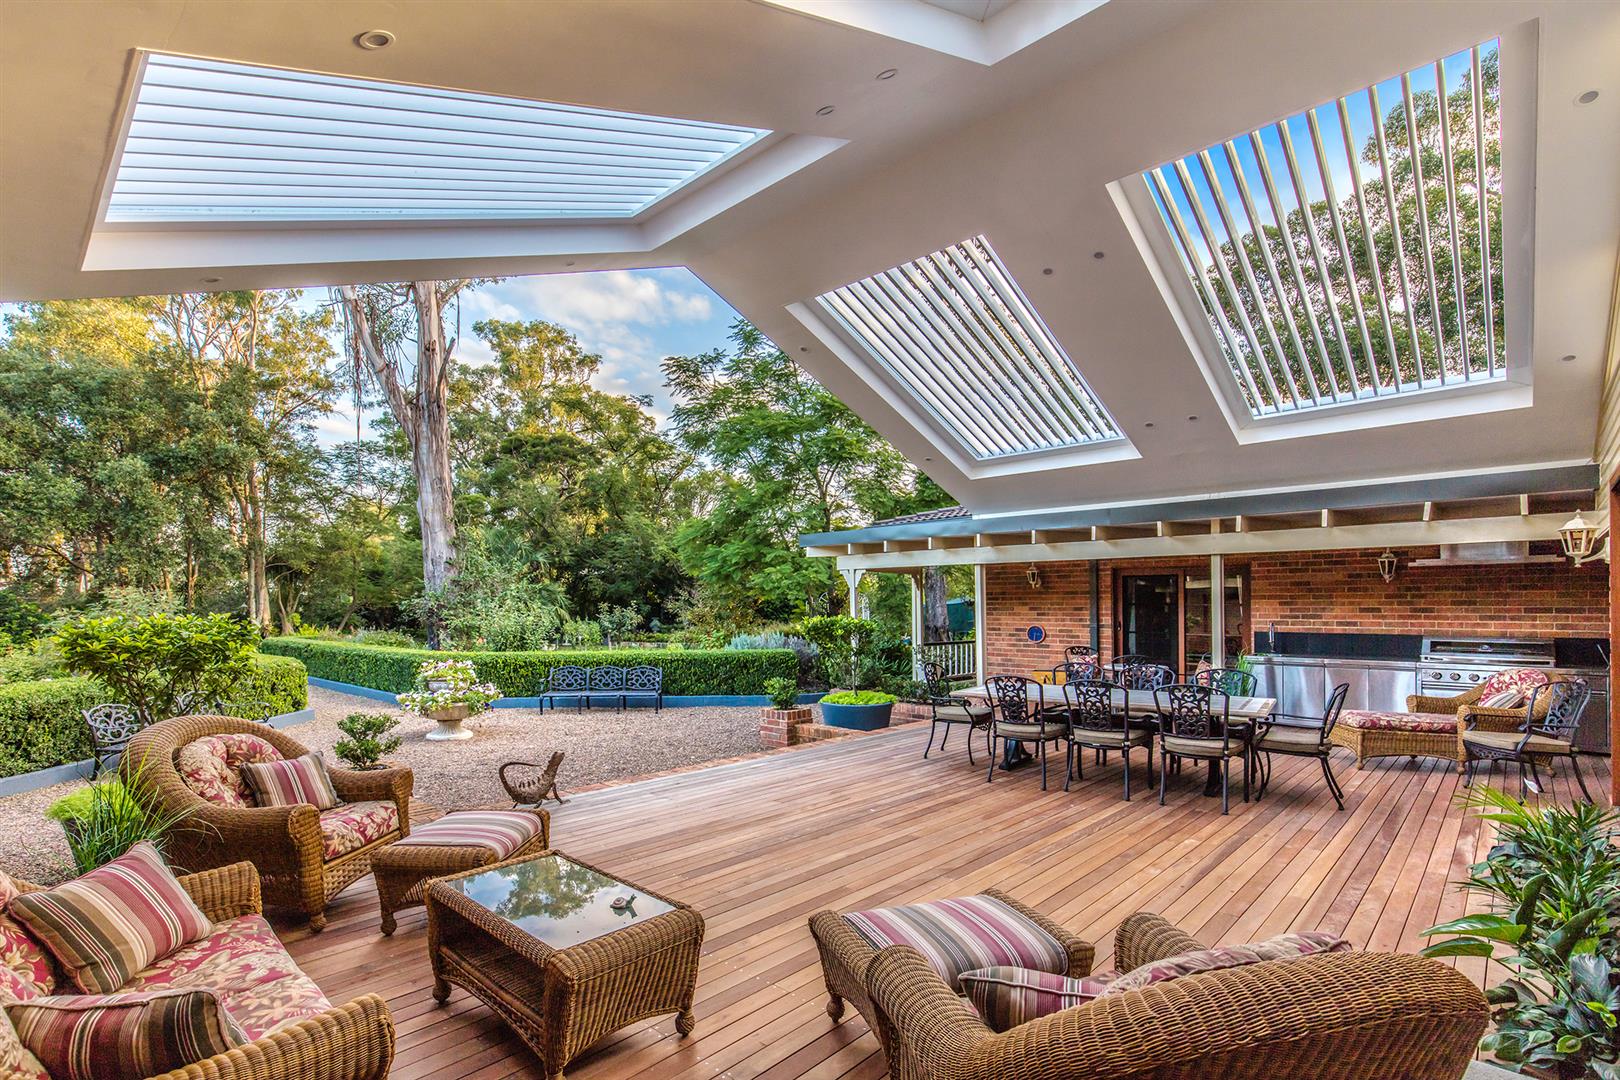 Outdoor entertaining area complete with furniture, outdoor kitchen, and a huge gable roof pergola with opening louvres.